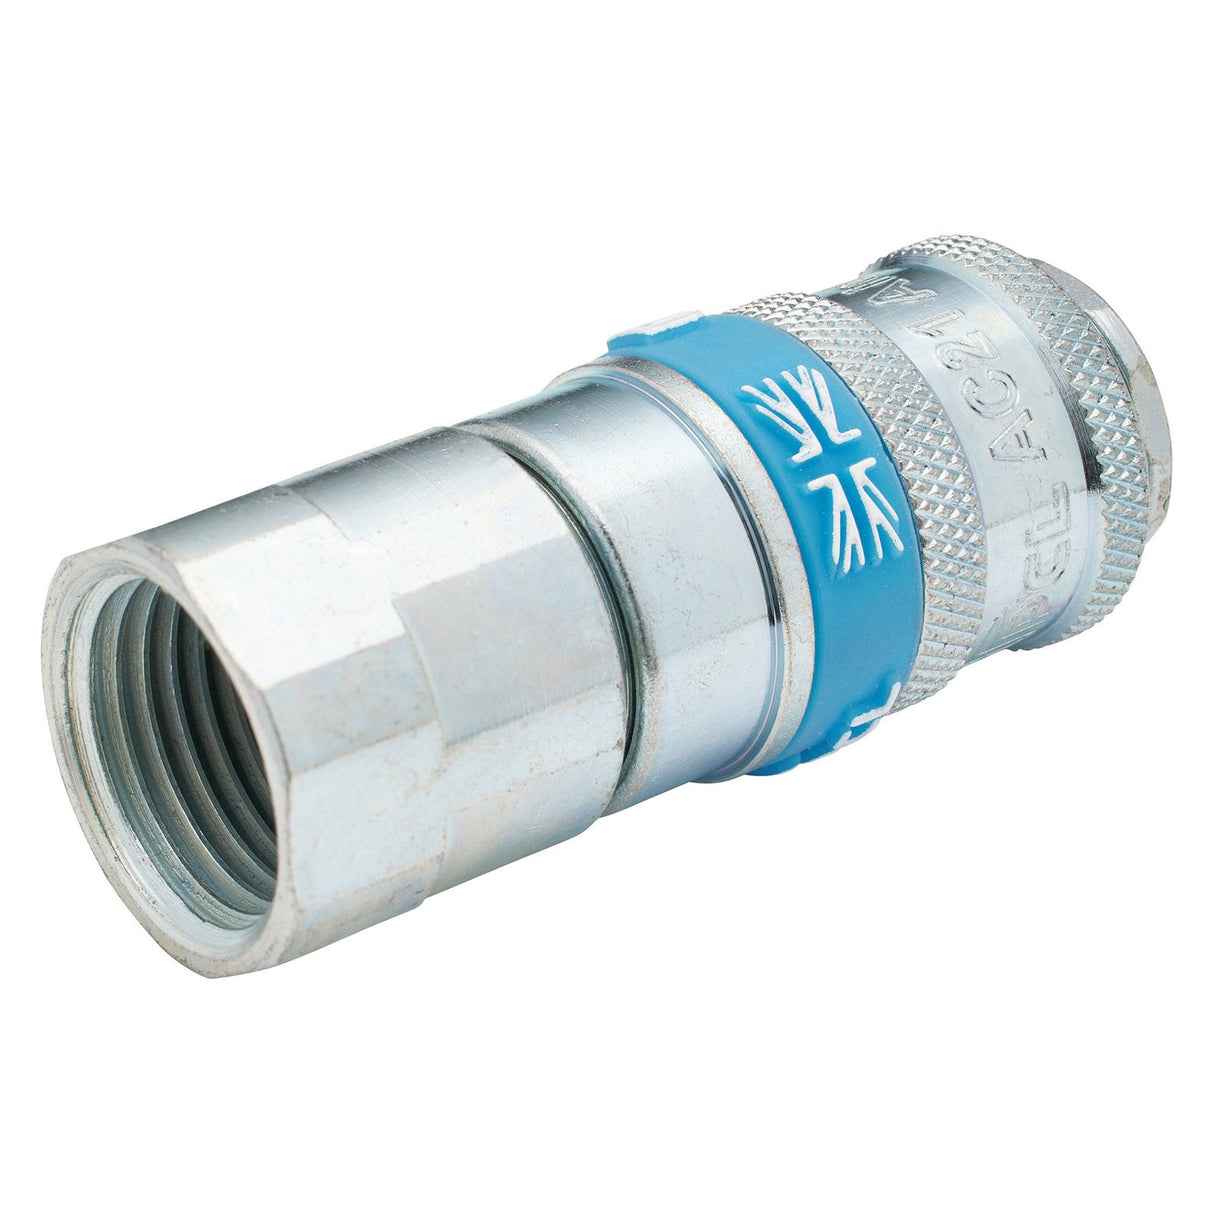 Draper 1/2" Female Thread Pcl Parallel Airflow Coupling (Sold Loose) - A21JF02 BULK - Farming Parts